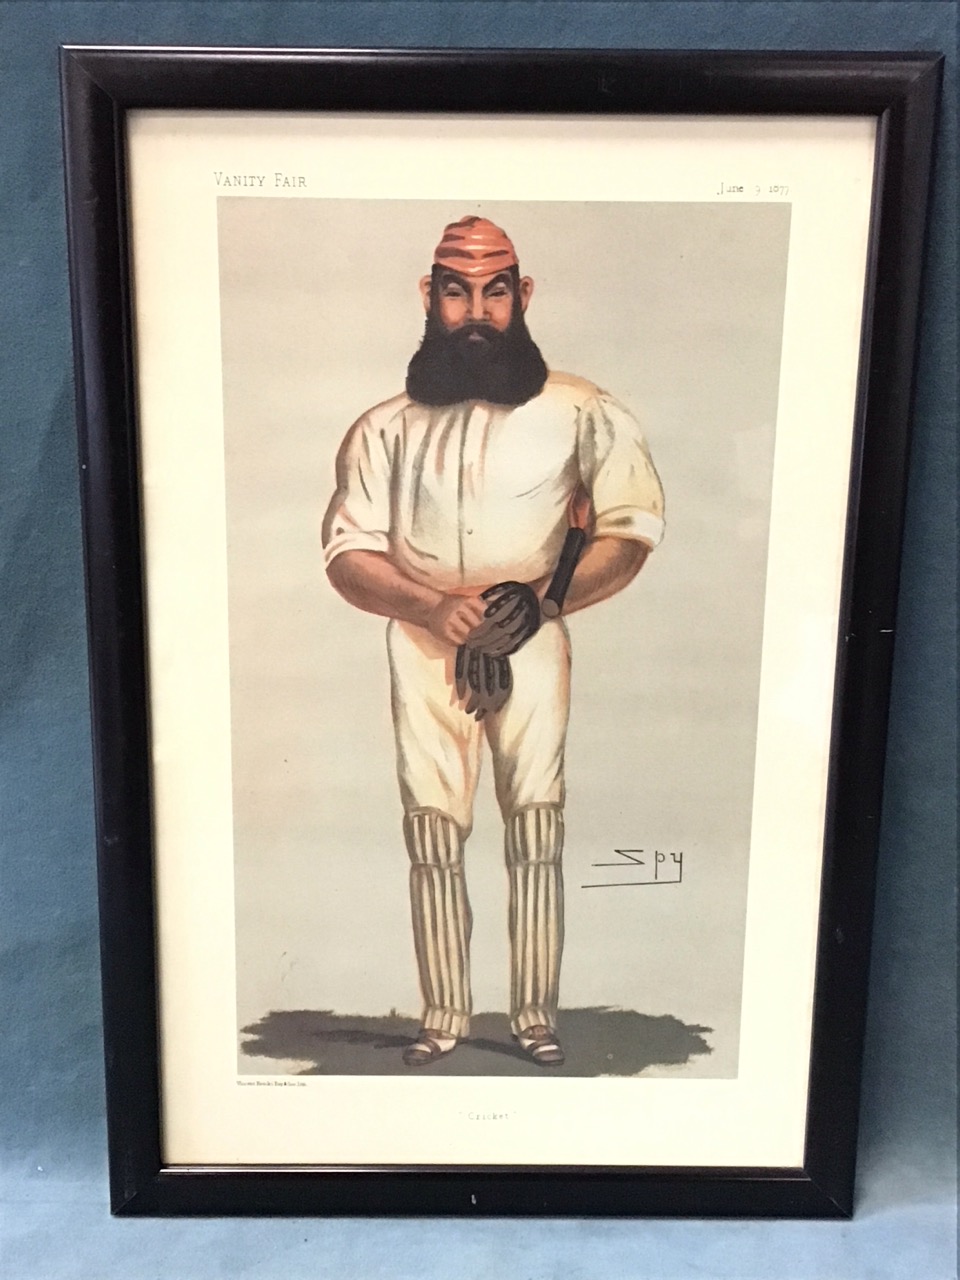 Spy, coloured print, caricature portrait of cricketer WG Grace from Vanity Fair, June 9 1877, signed